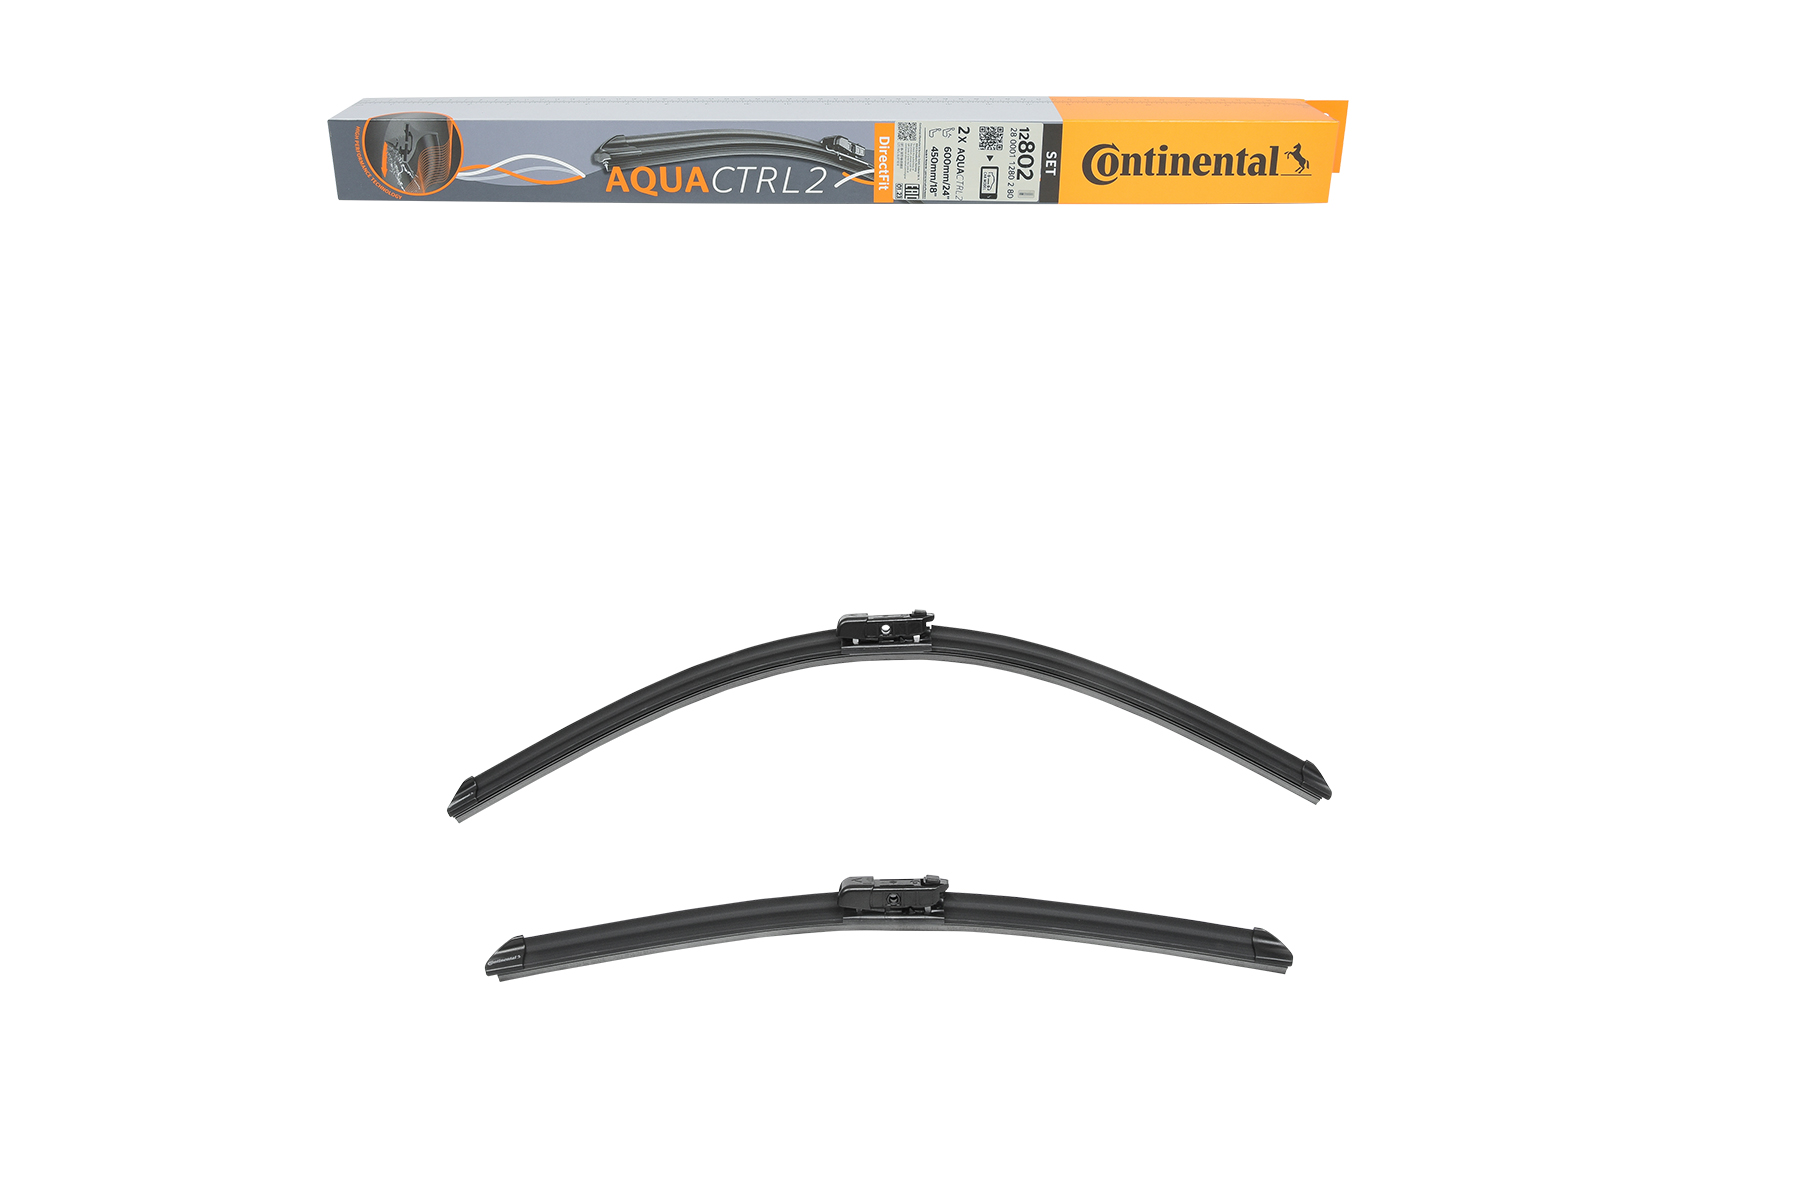 12802 Continental AQUACTRL2 600, 450 mm Front, Flat wiper blade, with spoiler, 24/18 Inch Styling: with spoiler Wiper blades 2800011280280 buy